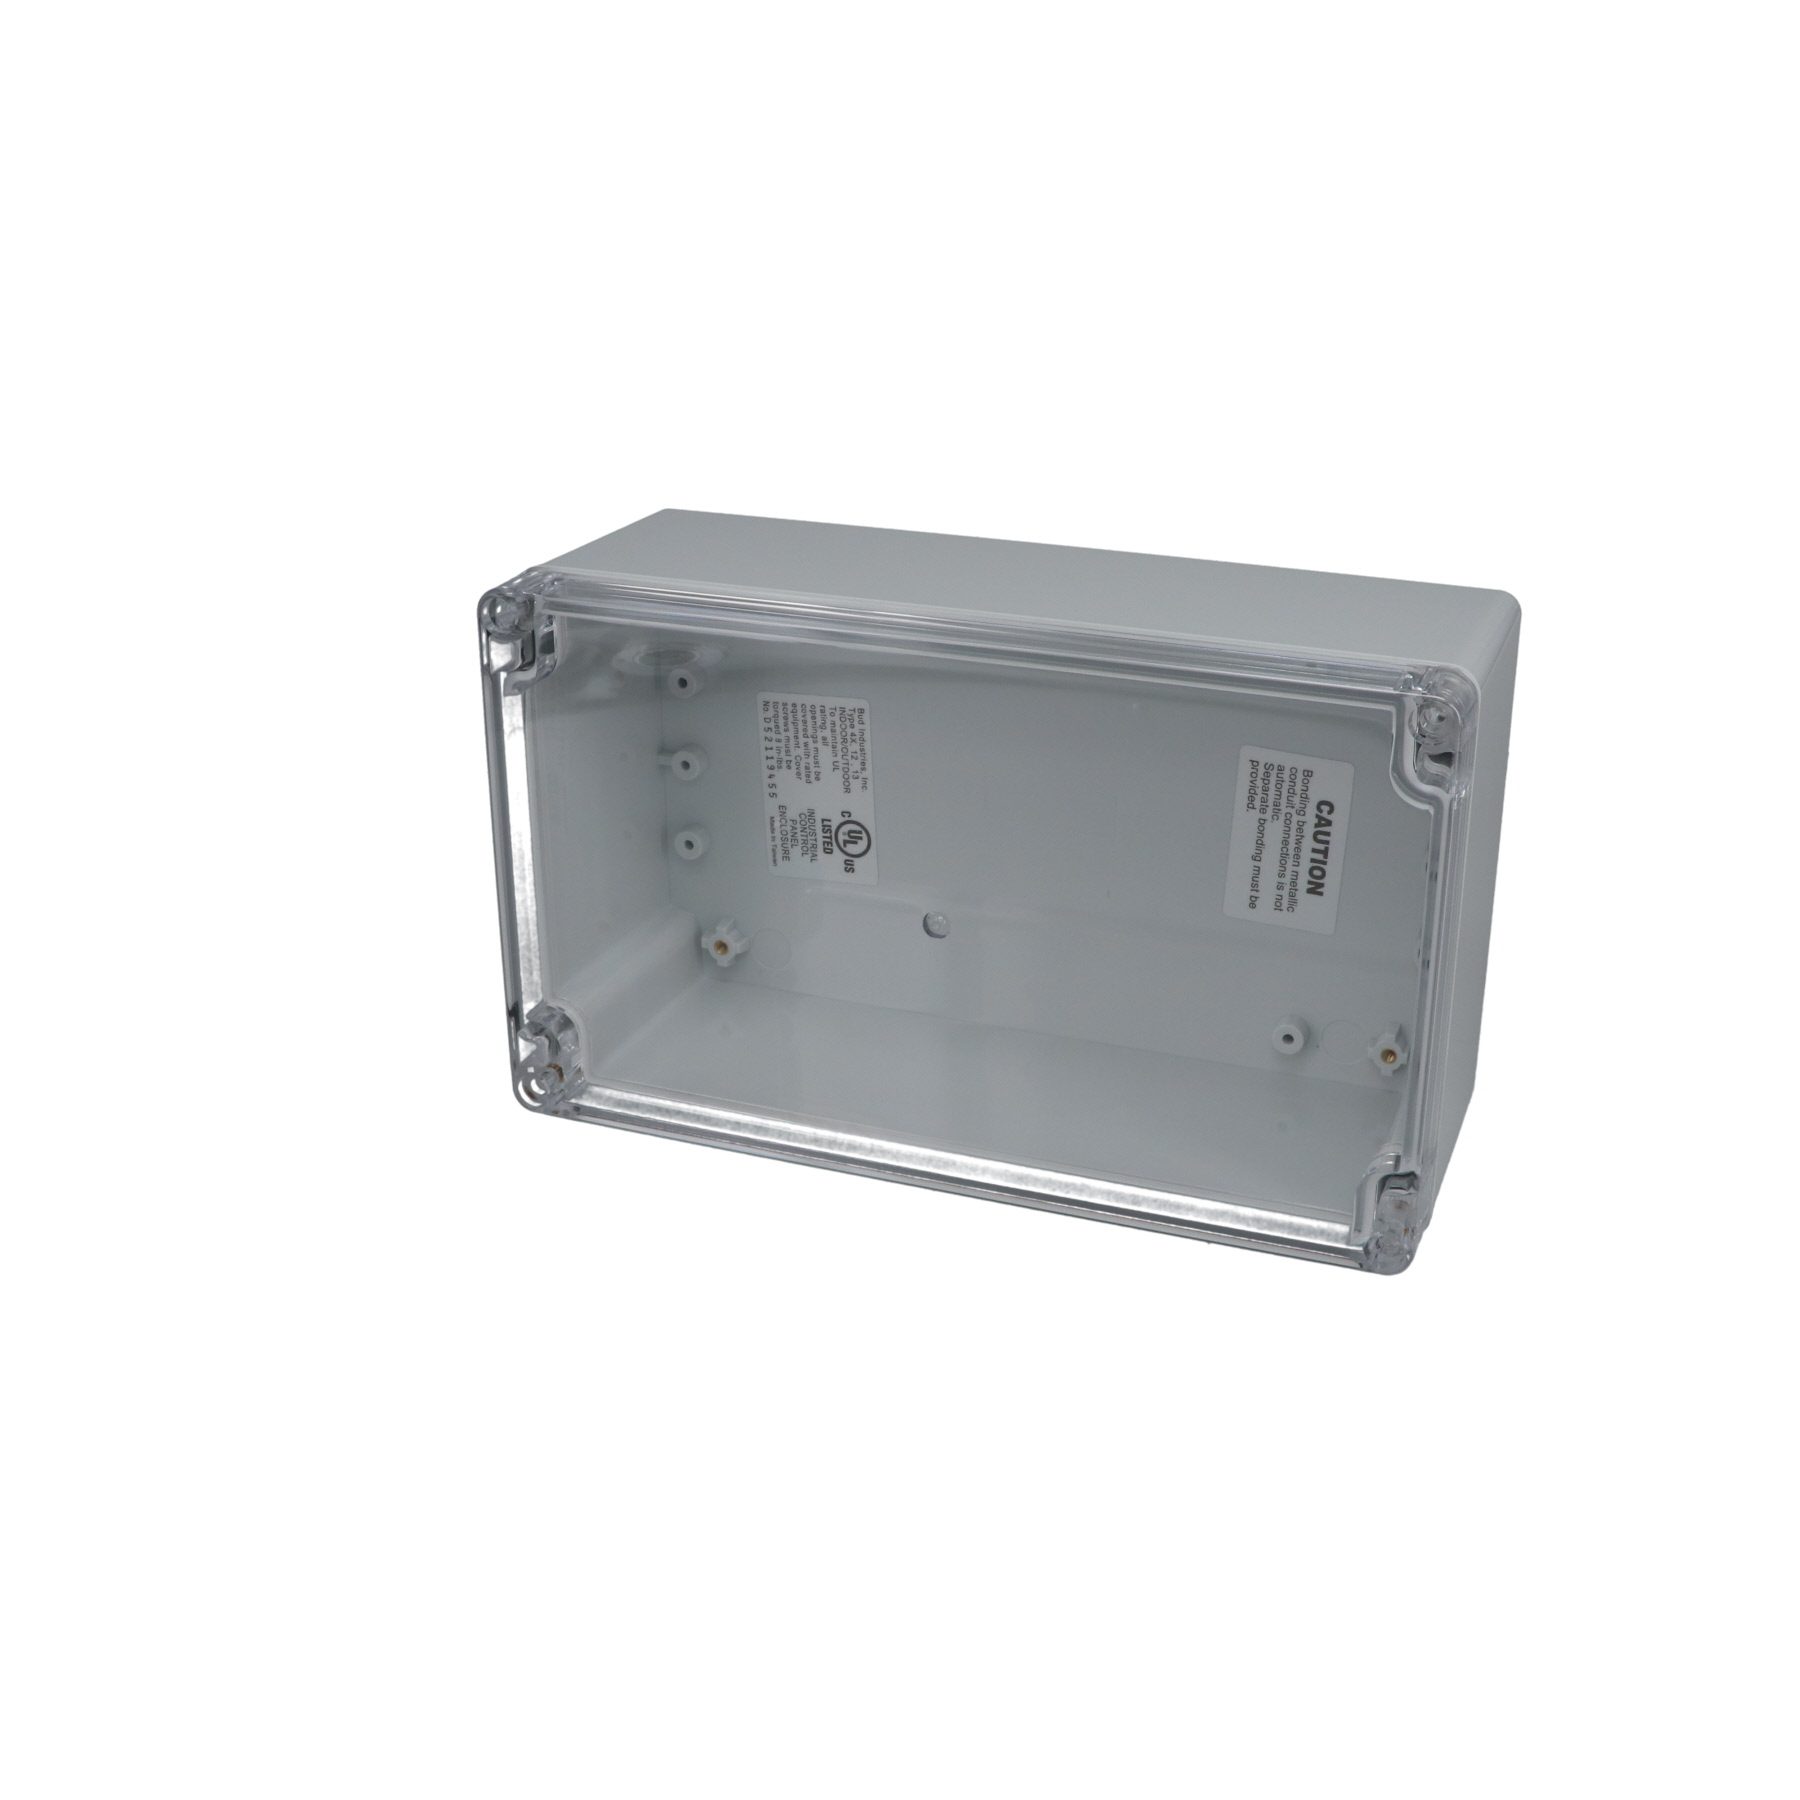 IP65 NEMA 4X Box with Clear Cover PN-1334-C